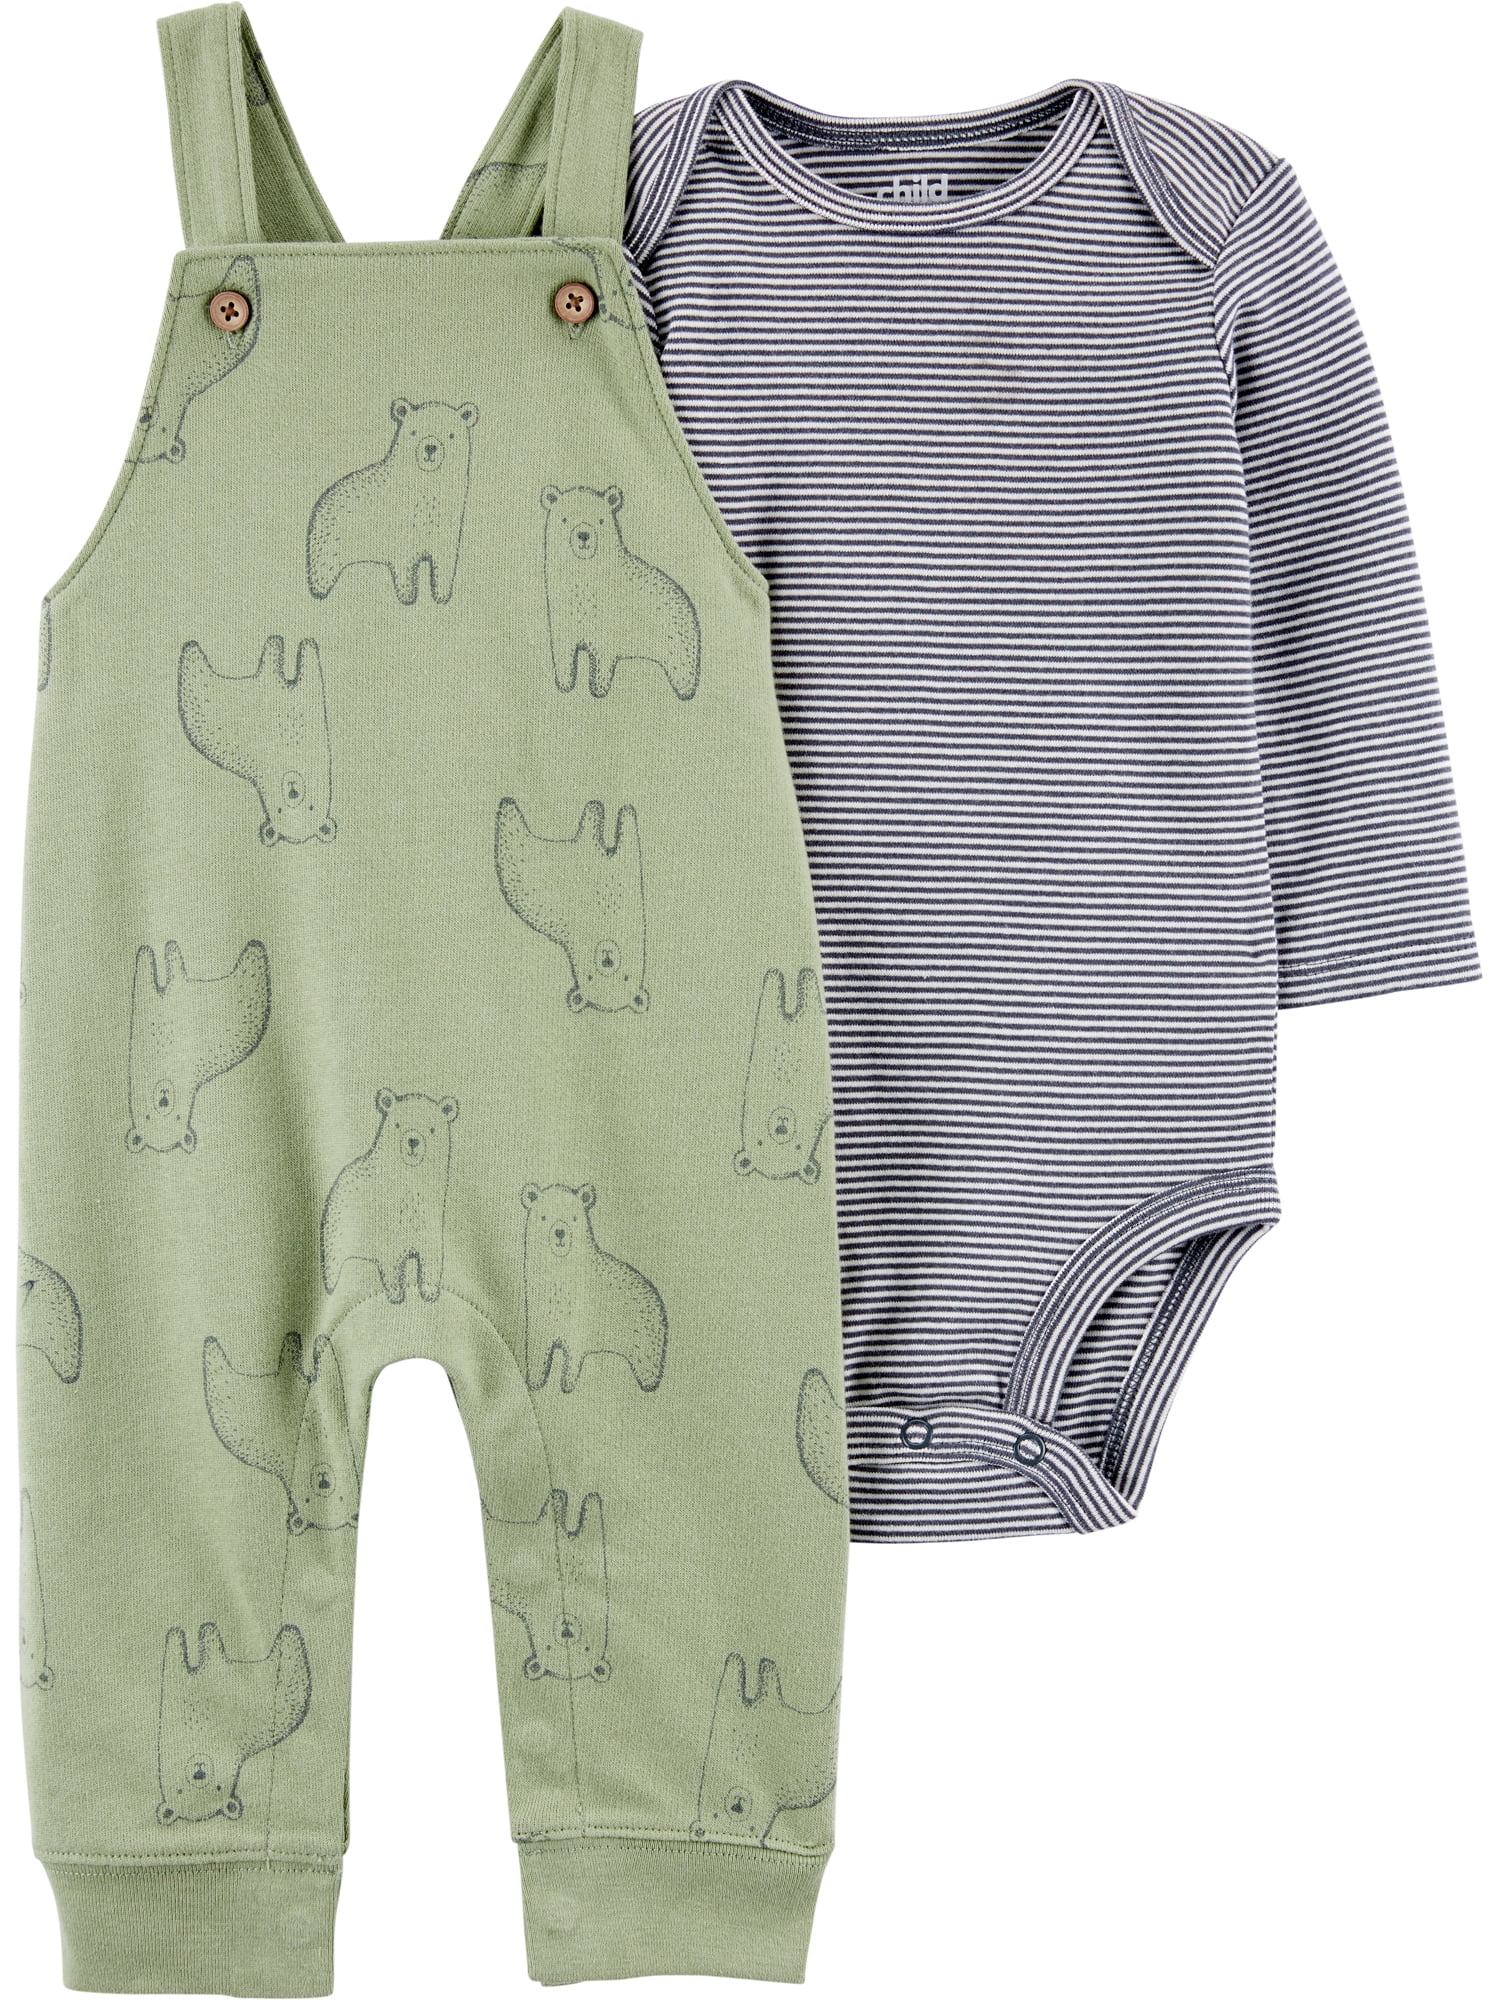 Carters Baby Boy Girl Easter Shirt Pants Hat Set Outfit Size 3 6 24 Months Grey 